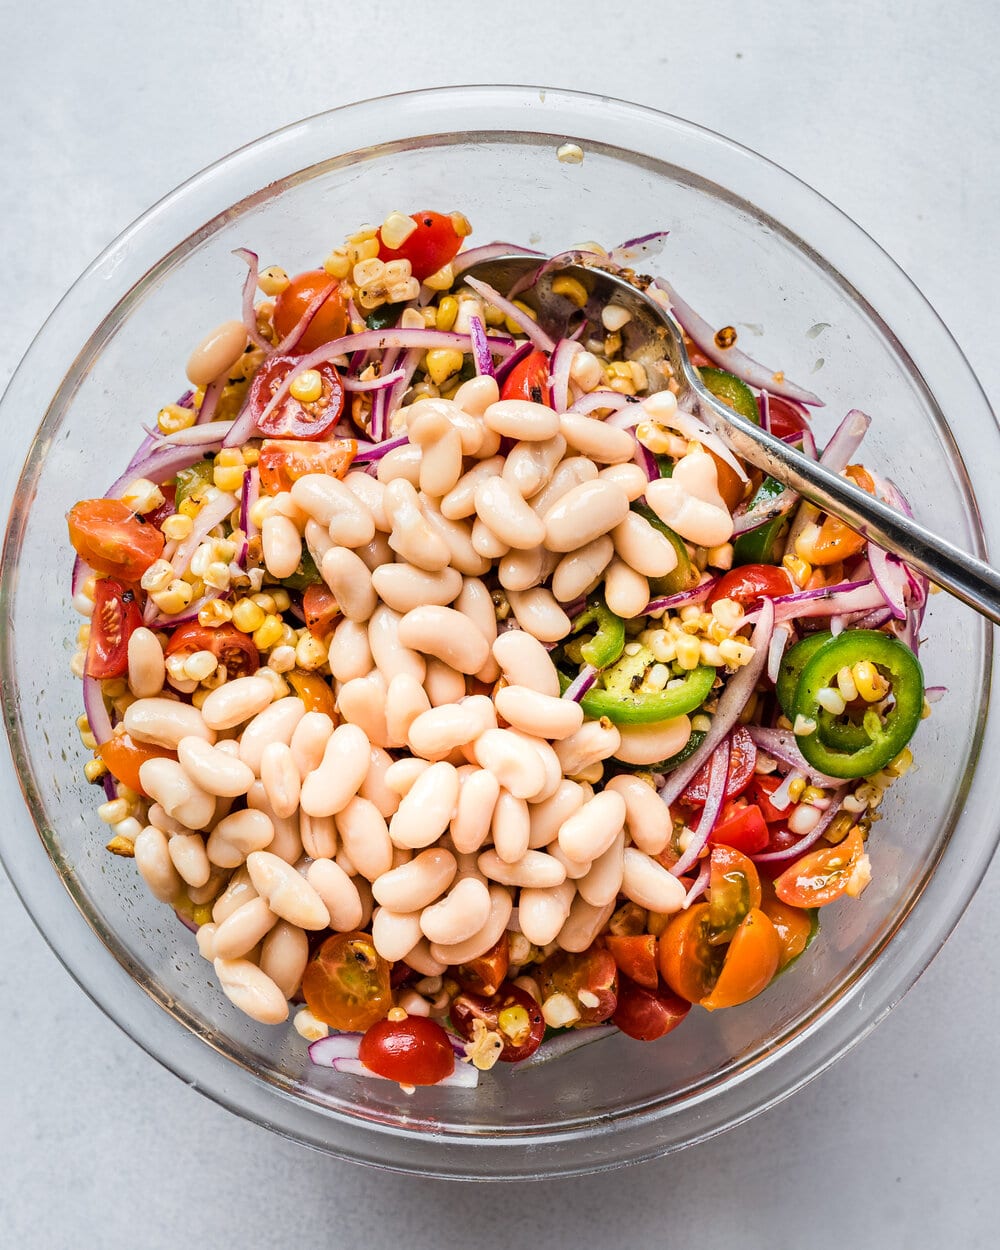 Charred corn salad with beans and avocado